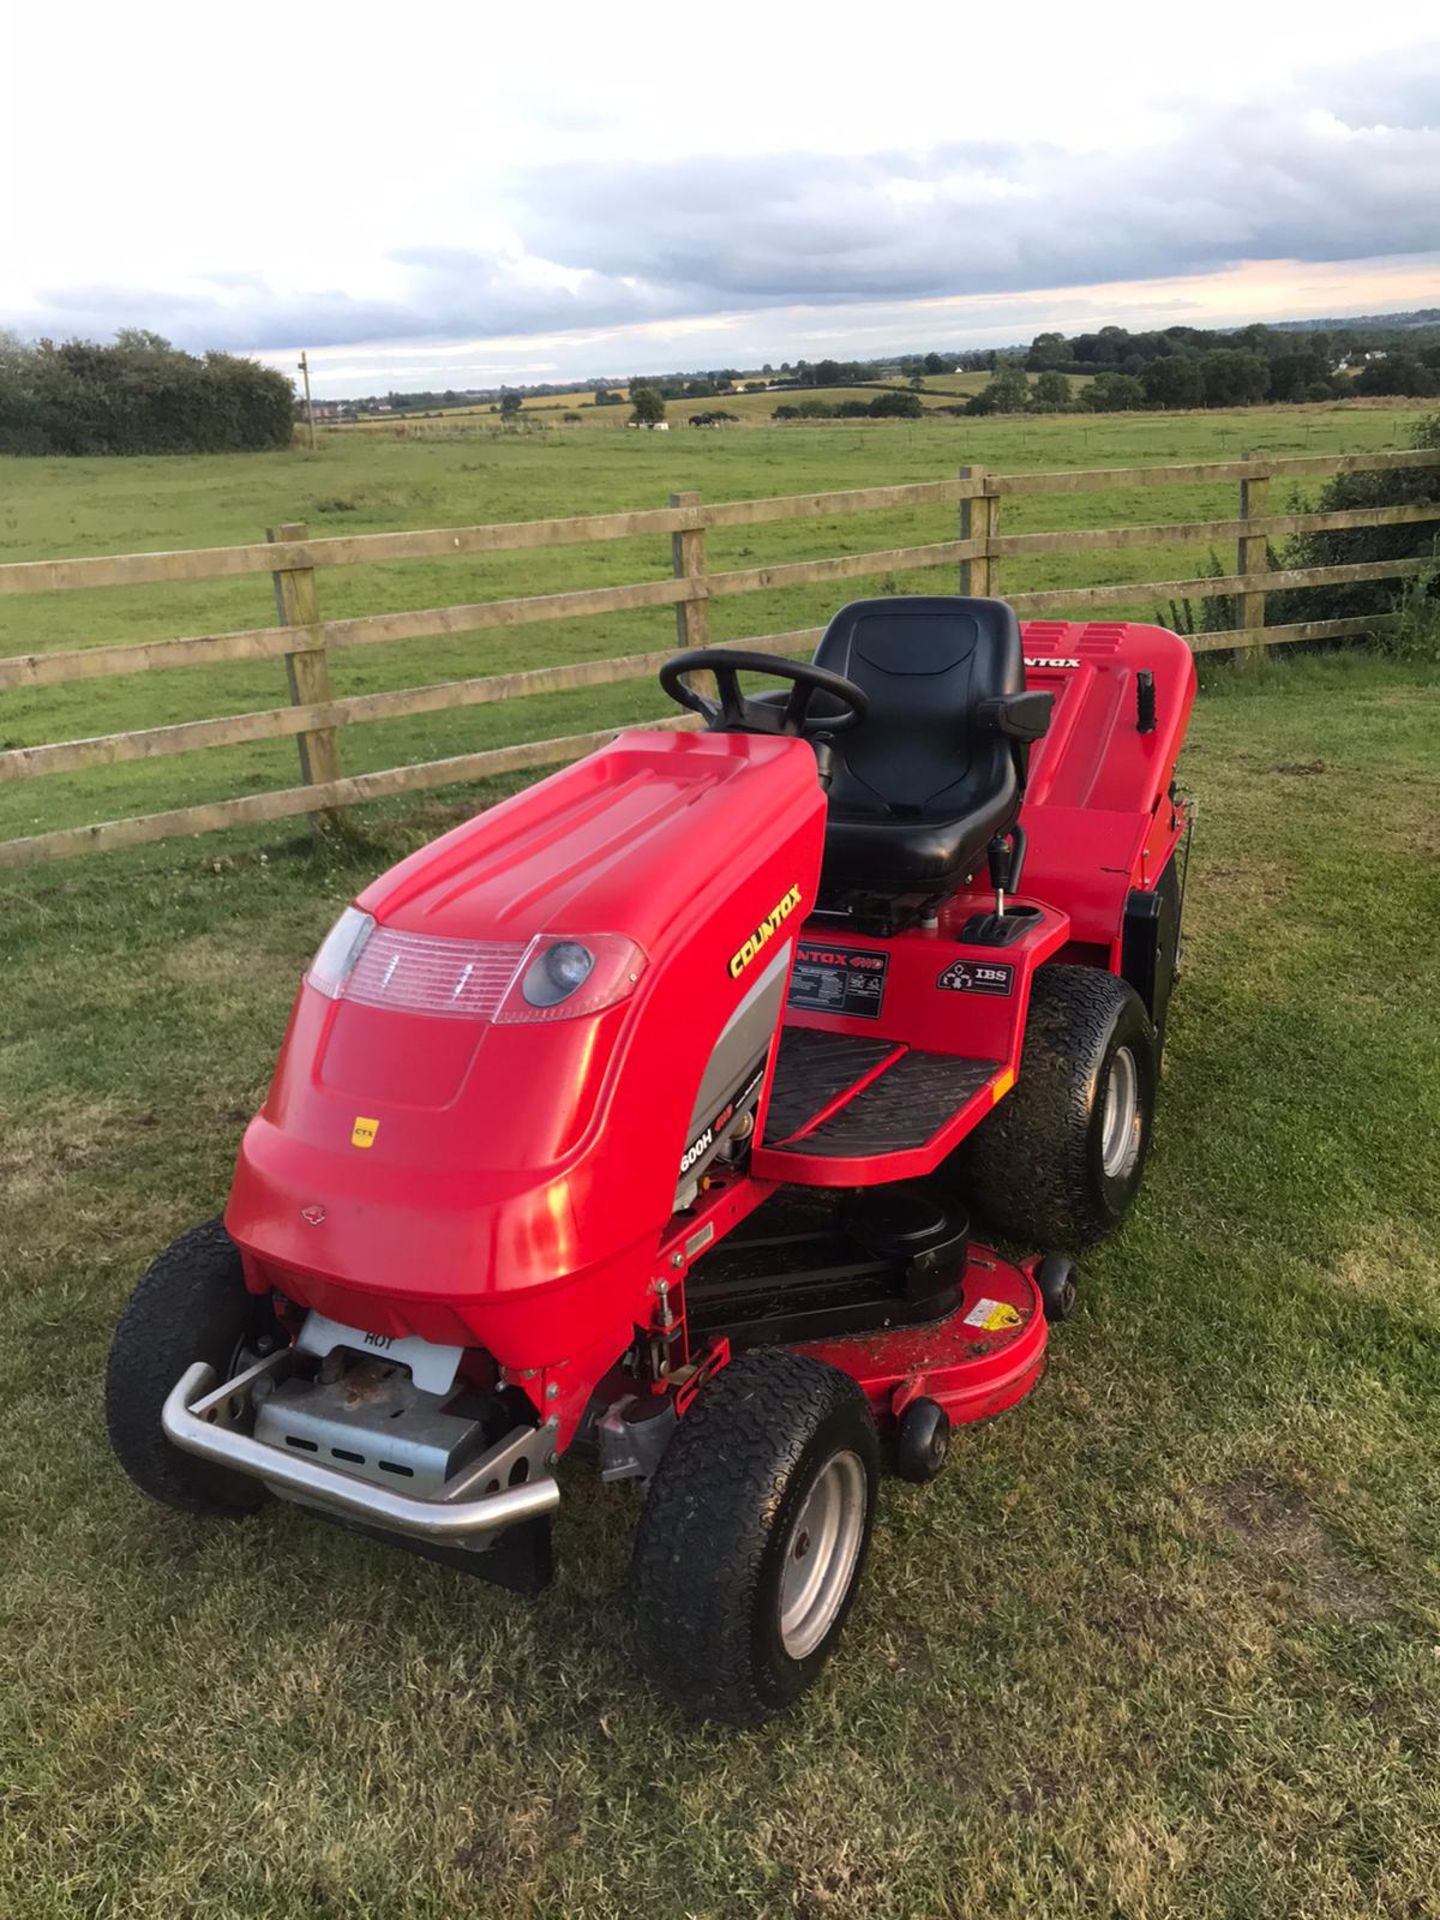 COUNTAX C600H 4WD RIDE ON LAWN MOWER, RUNS, DRIVES AND CUTS, CLEAN MACHINE, GREAT CONDITON *NO VAT* - Image 2 of 6